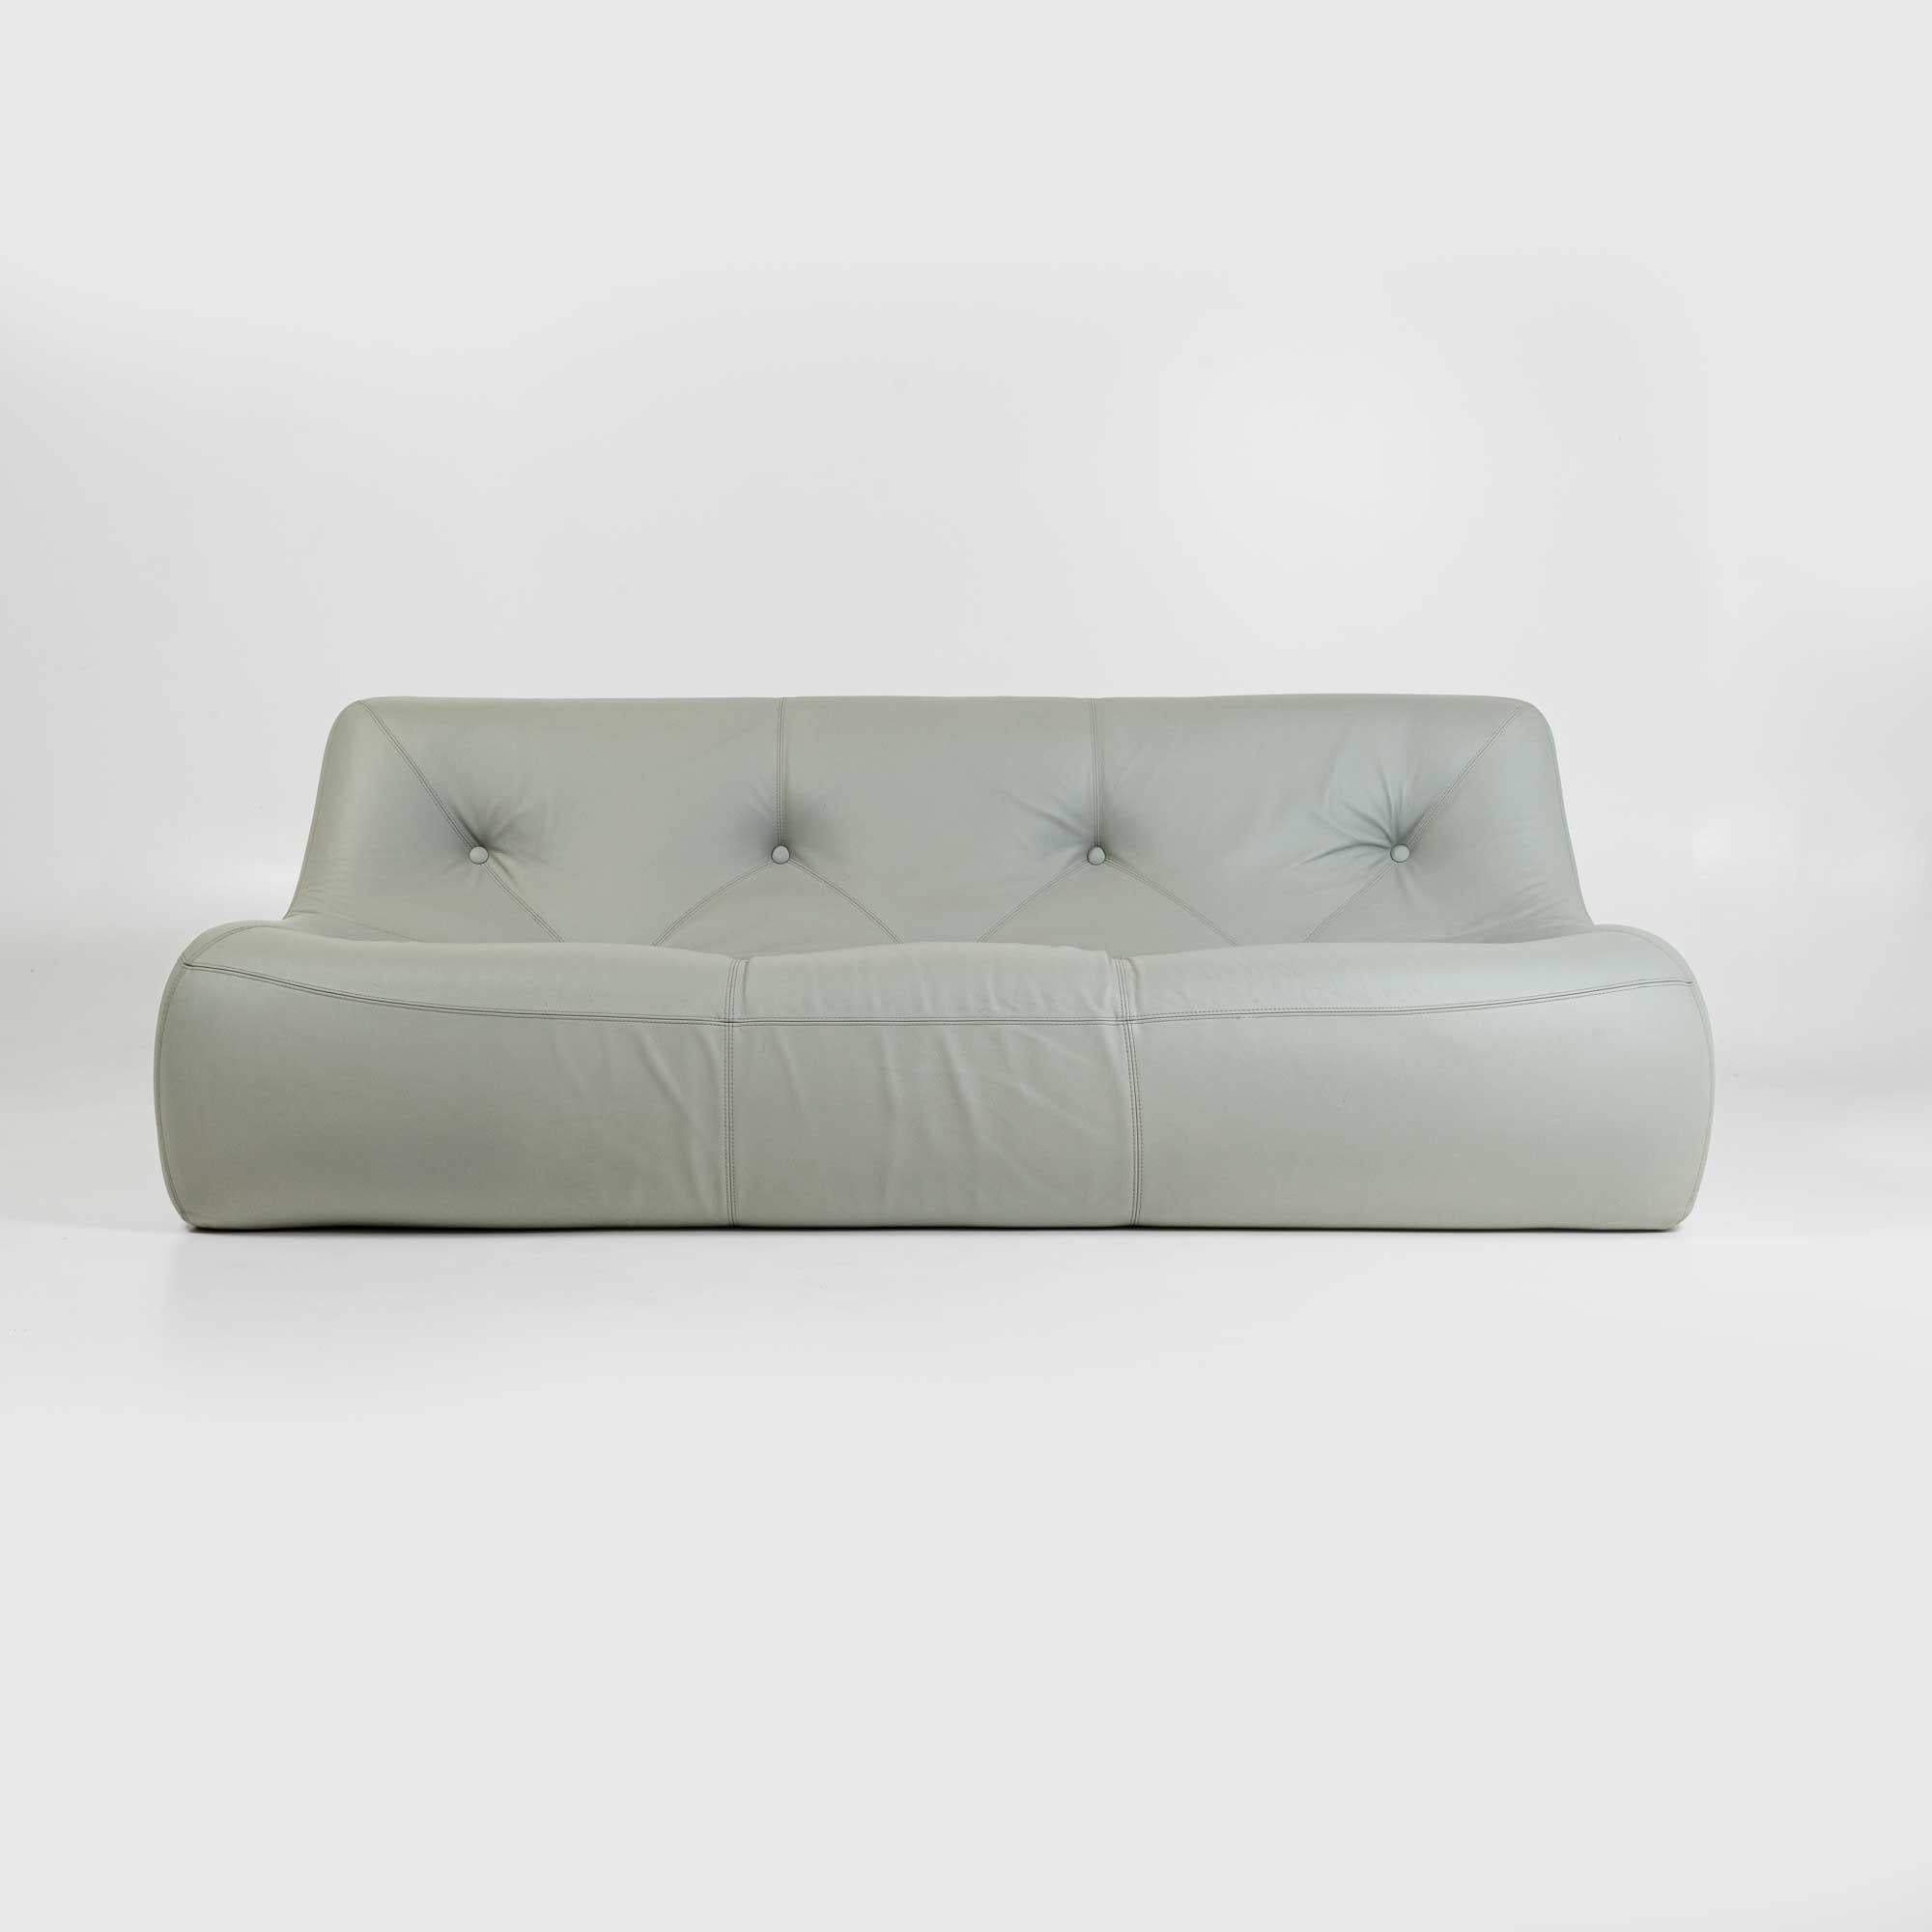 This is the Kali three seater sofa designed by Michel Ducaroy for Ligne Roset, France, upholstered in soft gray/ off-white leather. Some patina and wears on the leather, no tears. Ready to be used.

The 'Kali' sofa by Michel Ducaroy for Ligne